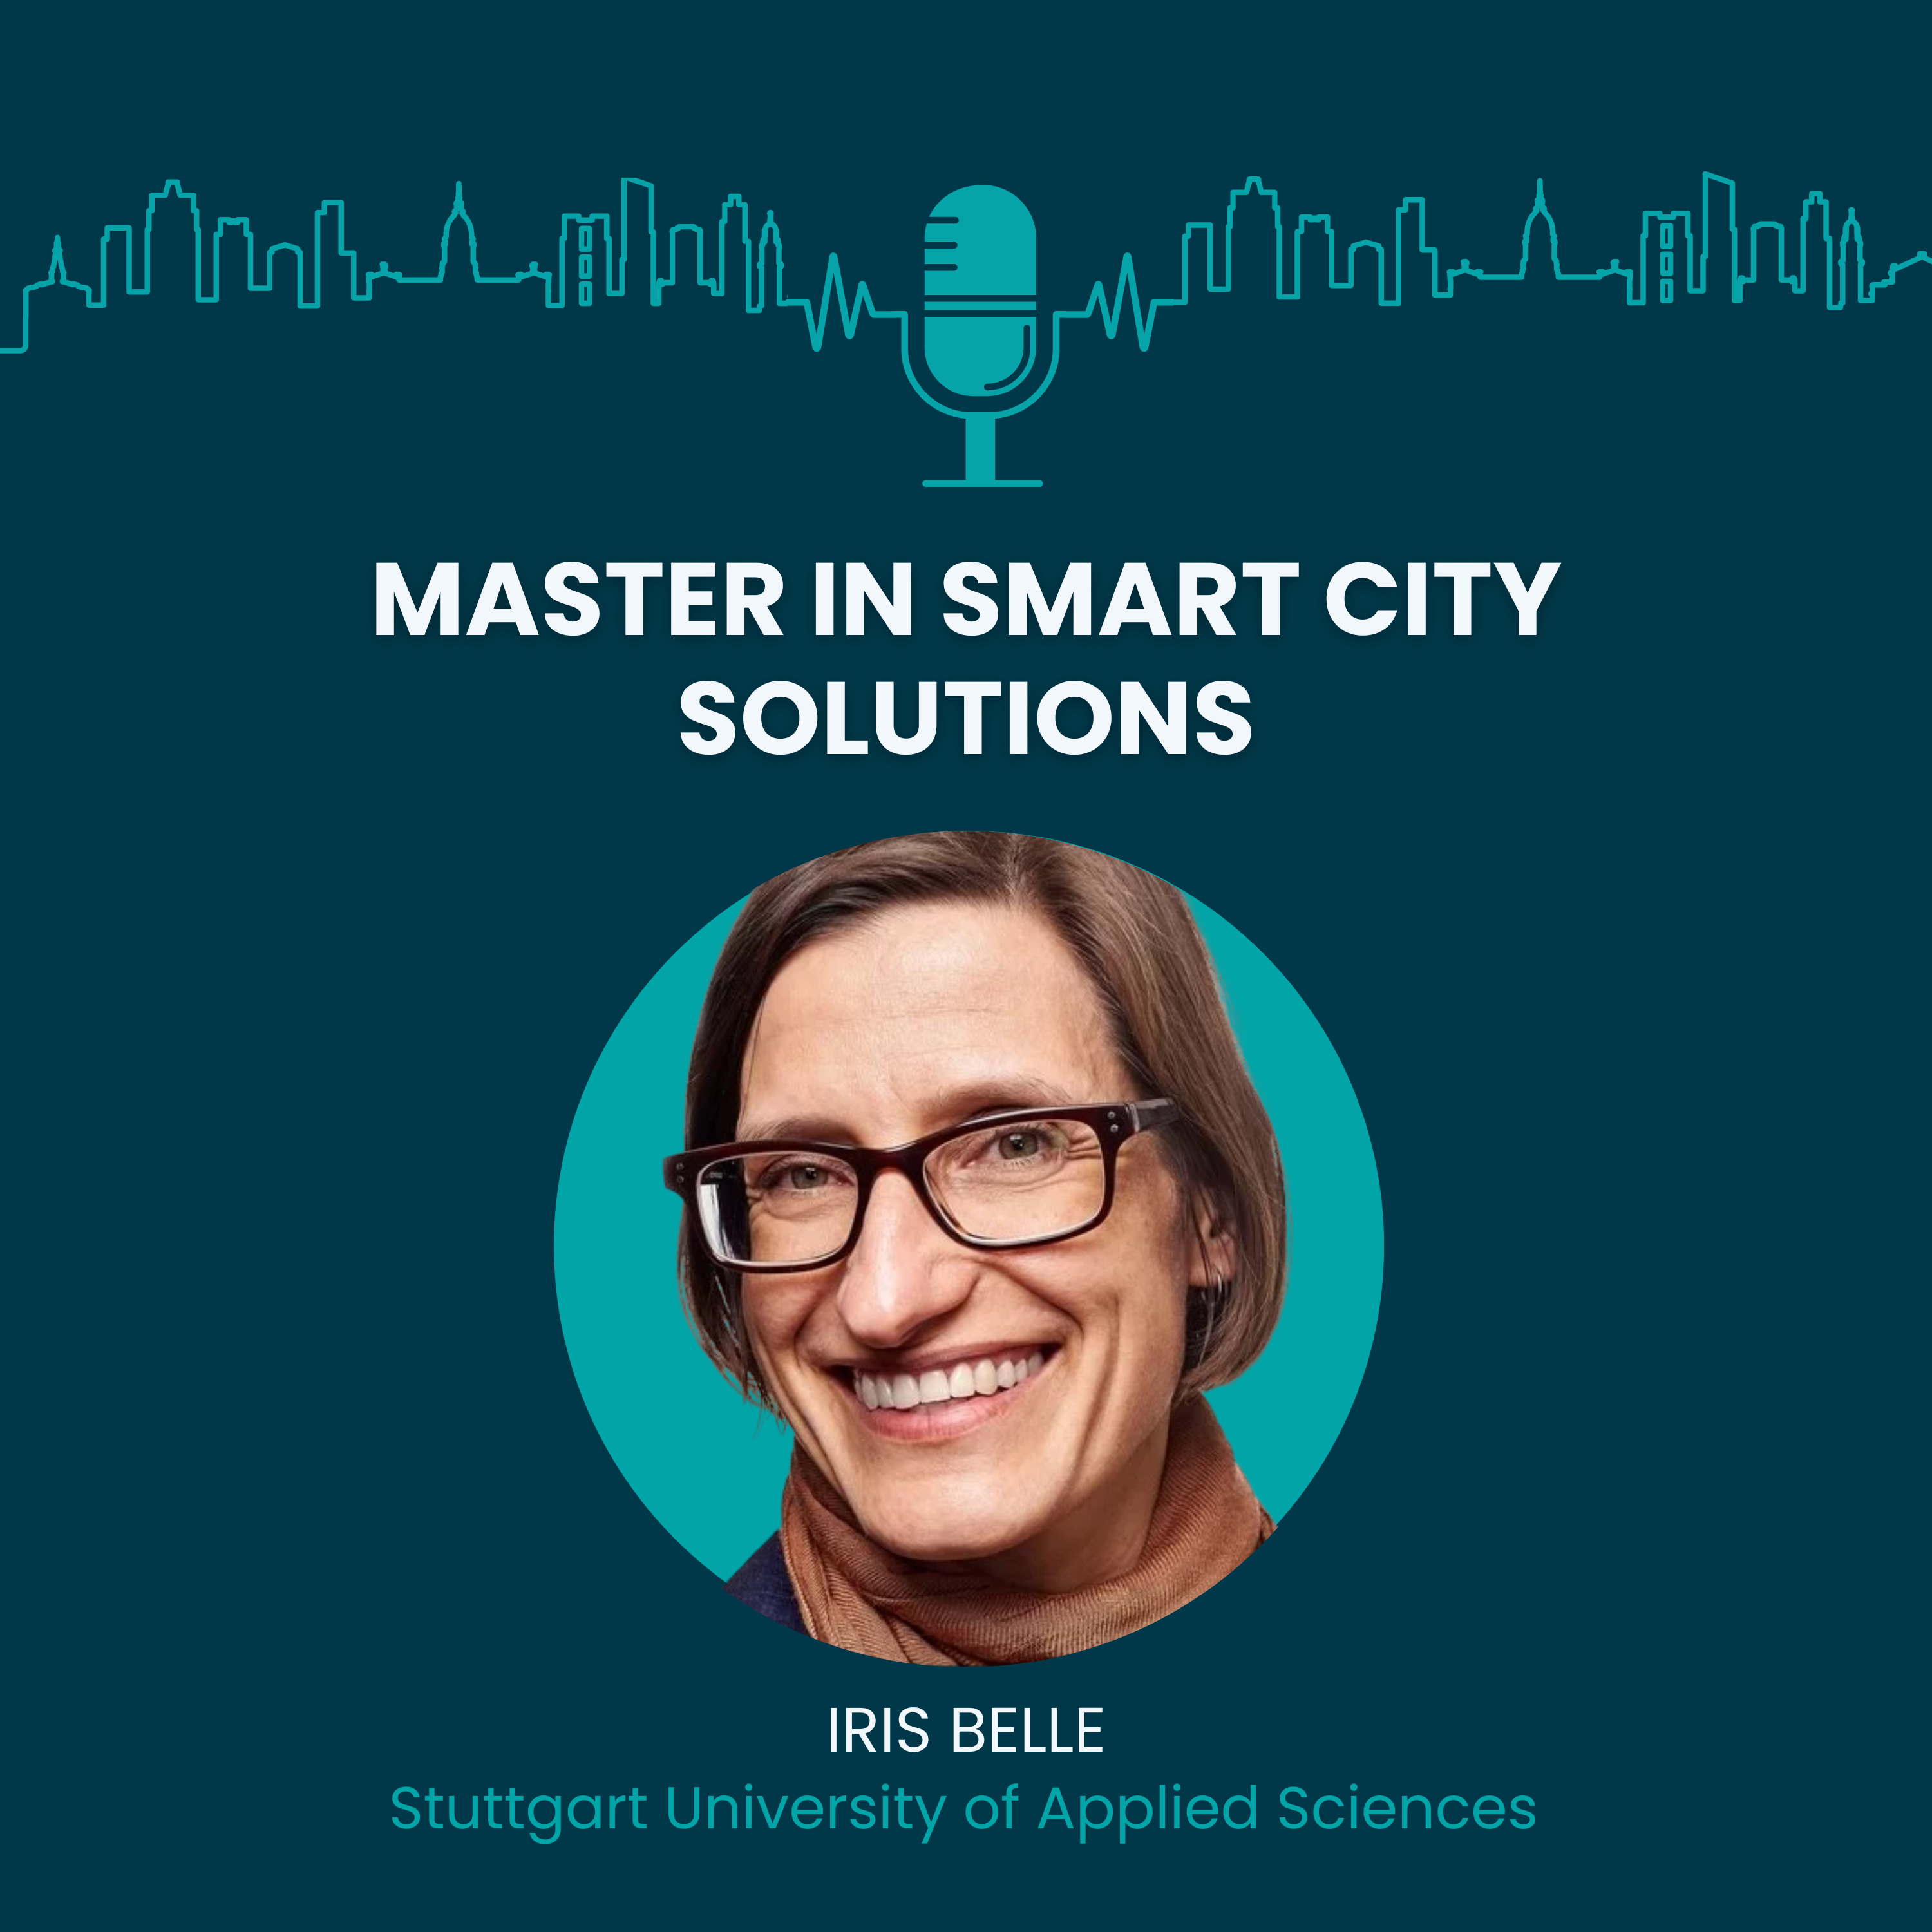 #8 Master in Smart City Solutions: "How do we train?"